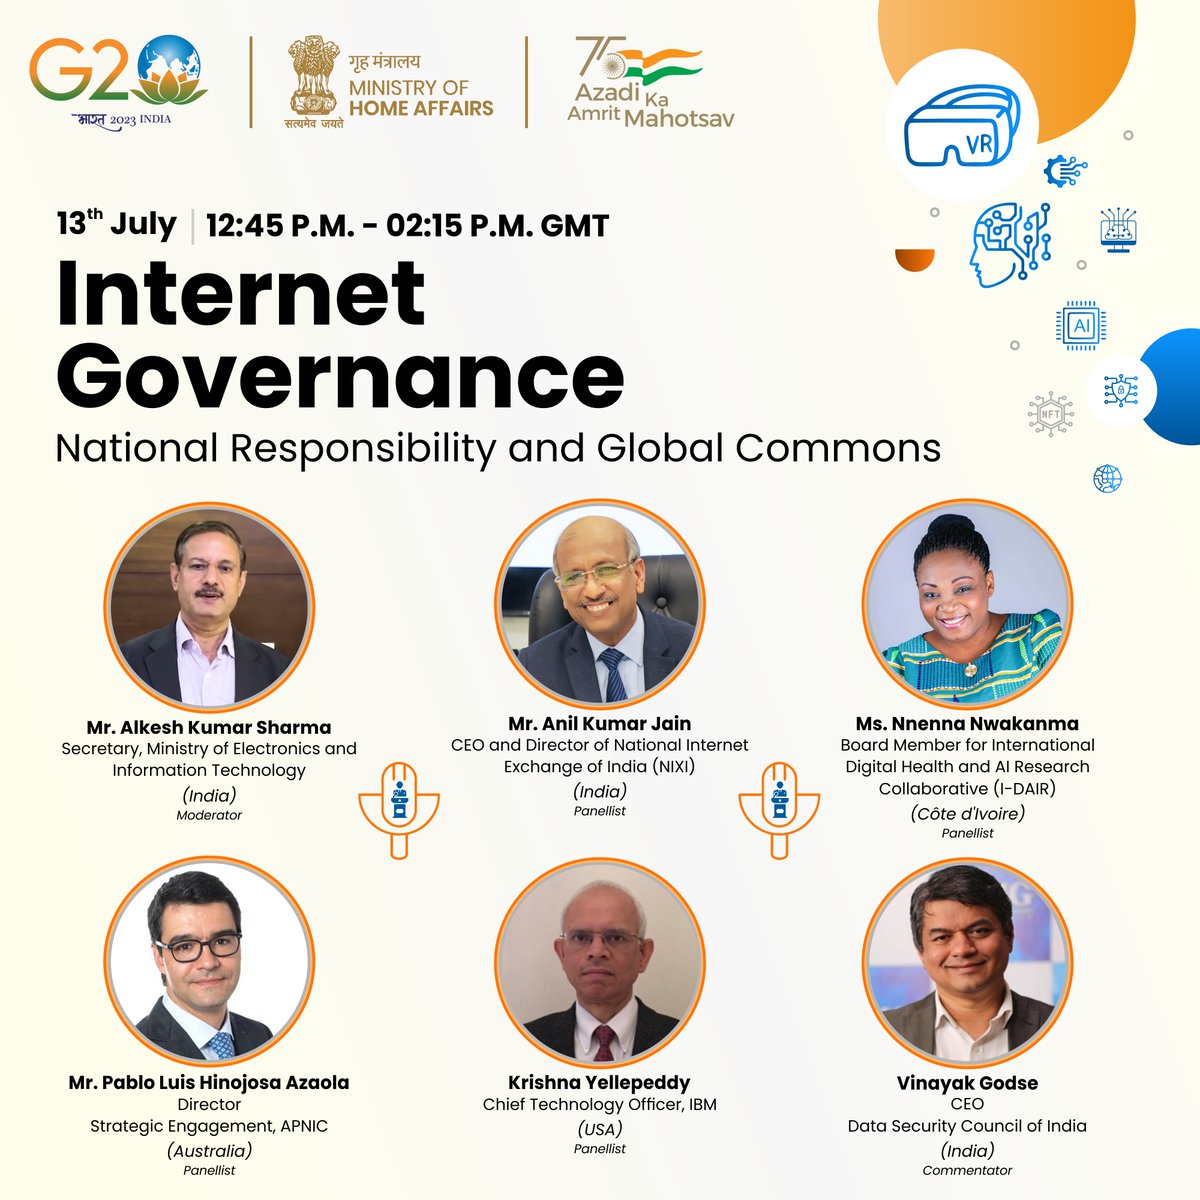 Watch the renowned cyber security experts, as they share valuable insights in Technical Session 1 on 'Internet Governance: National Responsibility & Global Commons' at G20 Conference on Crime & Security. More details at: cyberconference-g20india.mha.gov.in
#G20India #G20CCS #NoICTforCrime